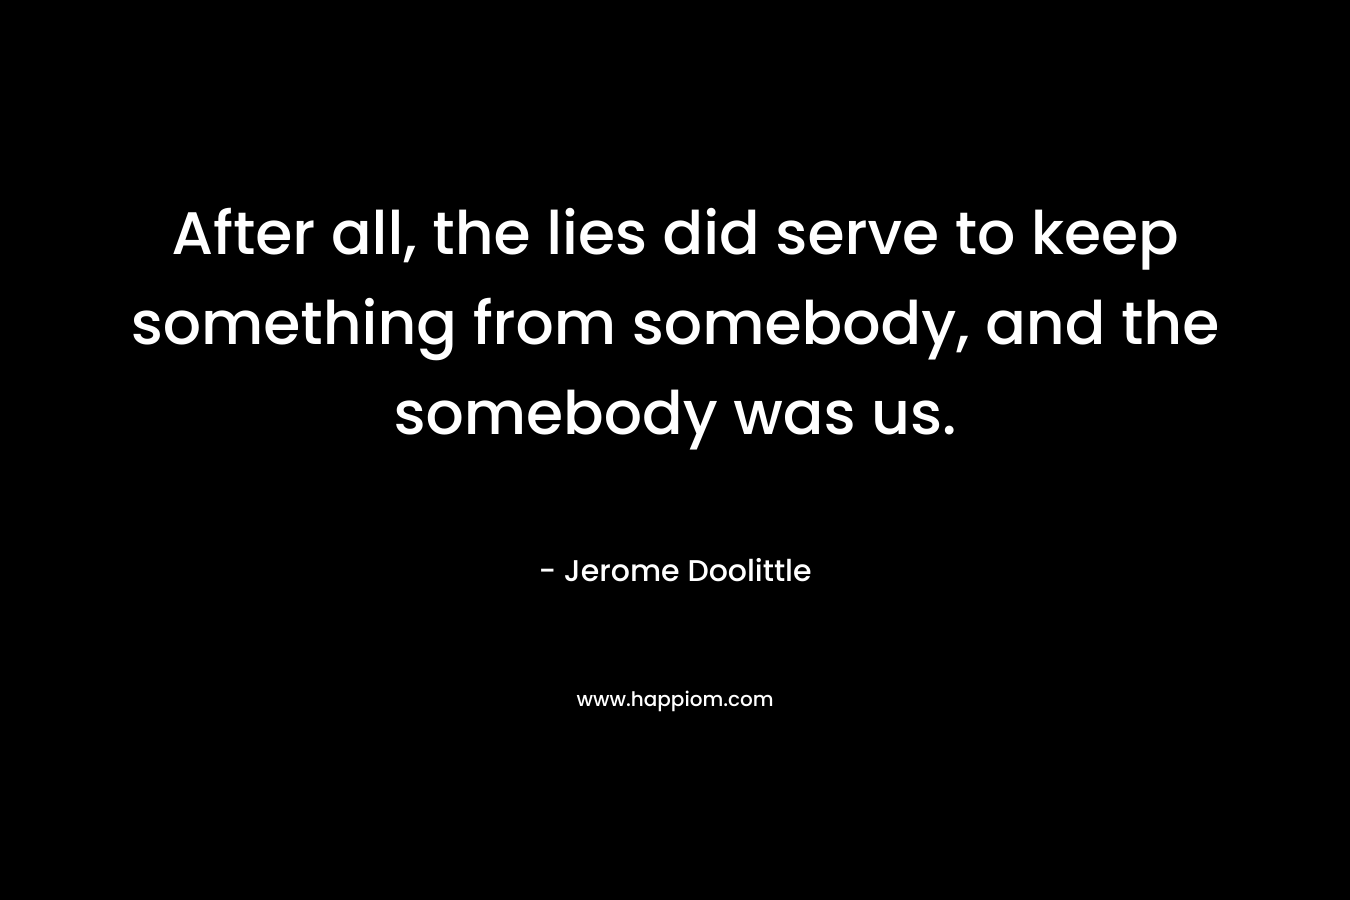 After all, the lies did serve to keep something from somebody, and the somebody was us.